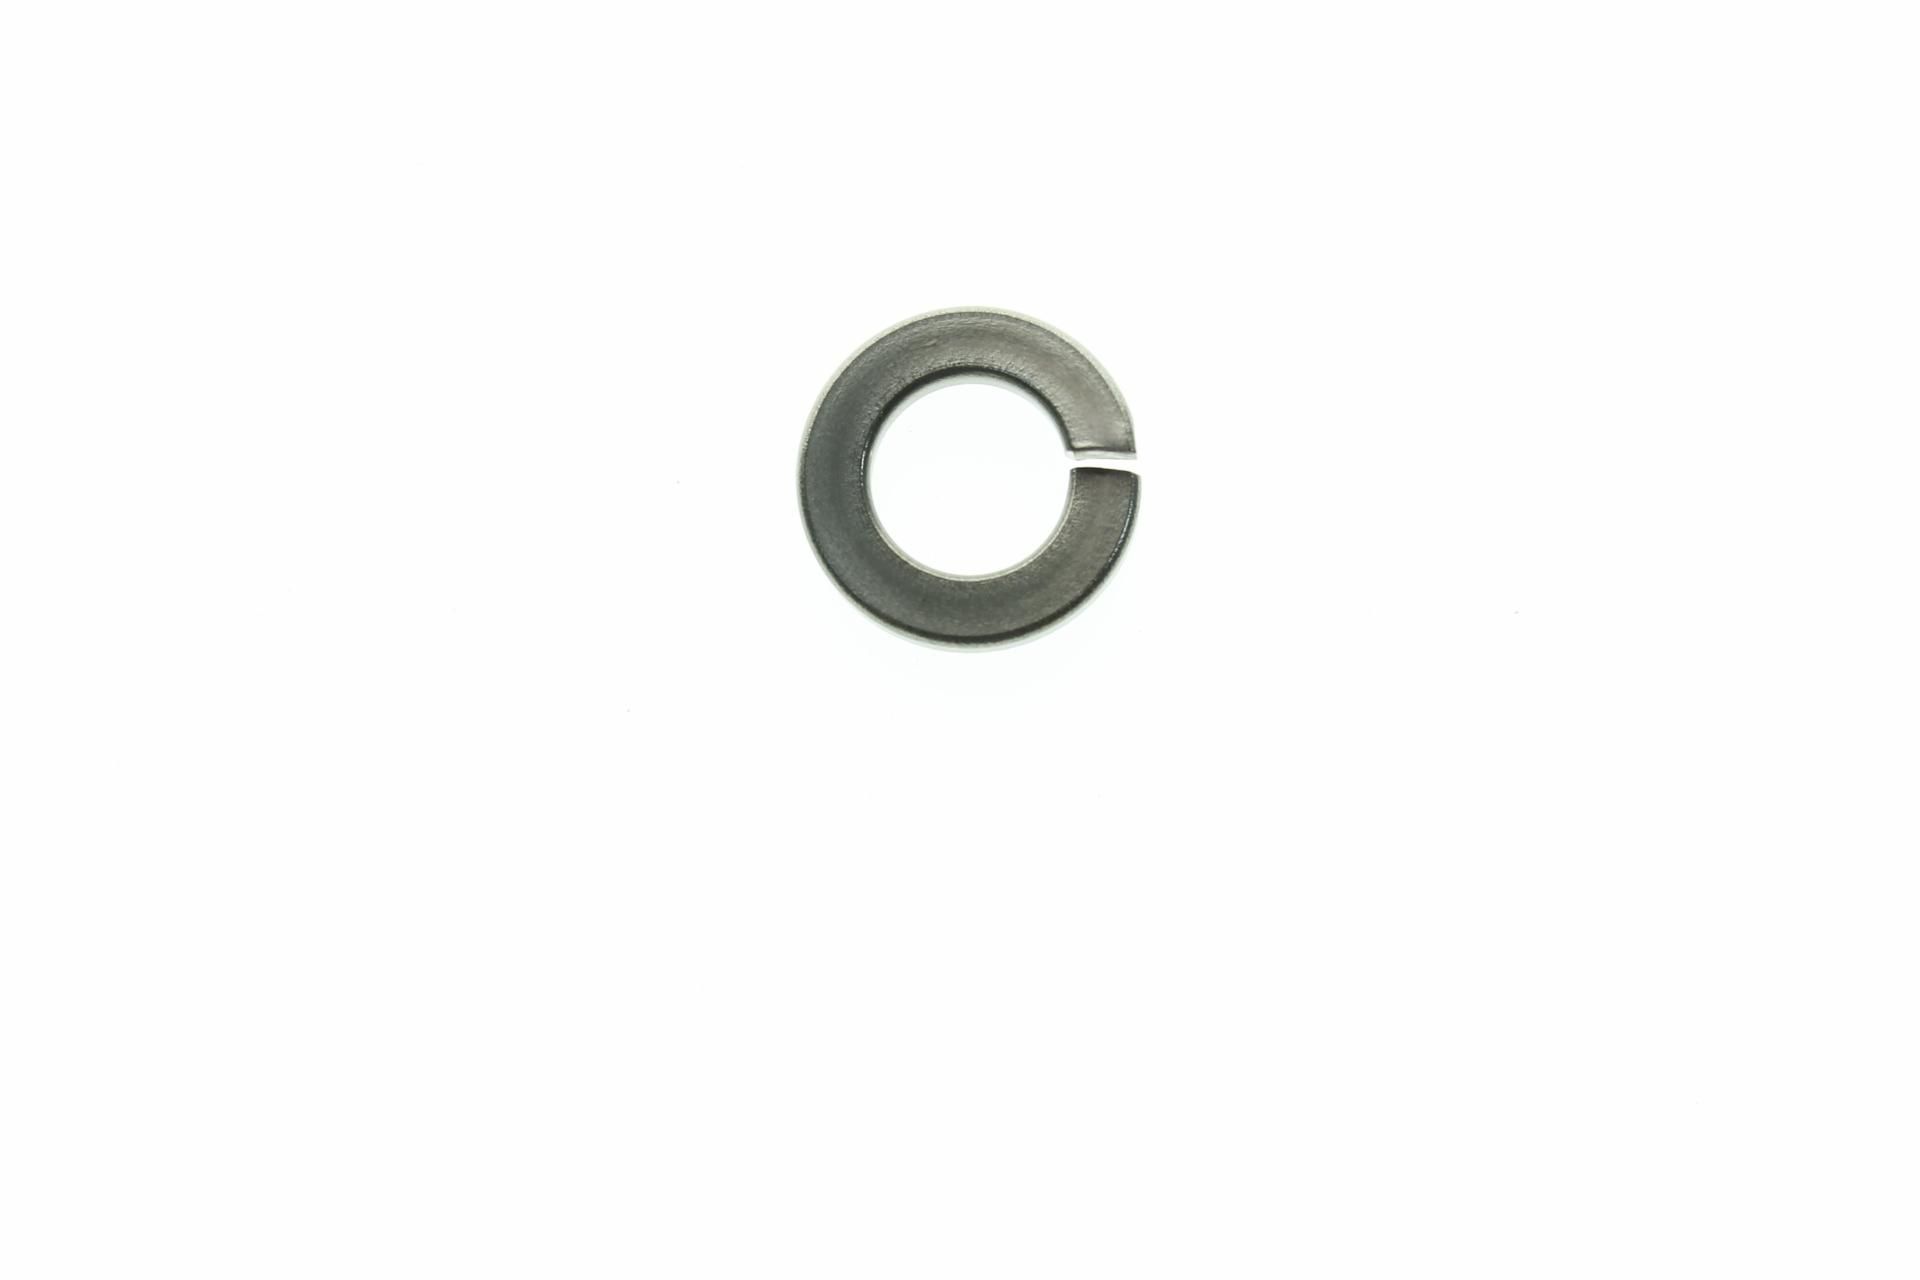 165-81156-00-00 Superseded by 92990-08100-00 - WASHER,SPRING